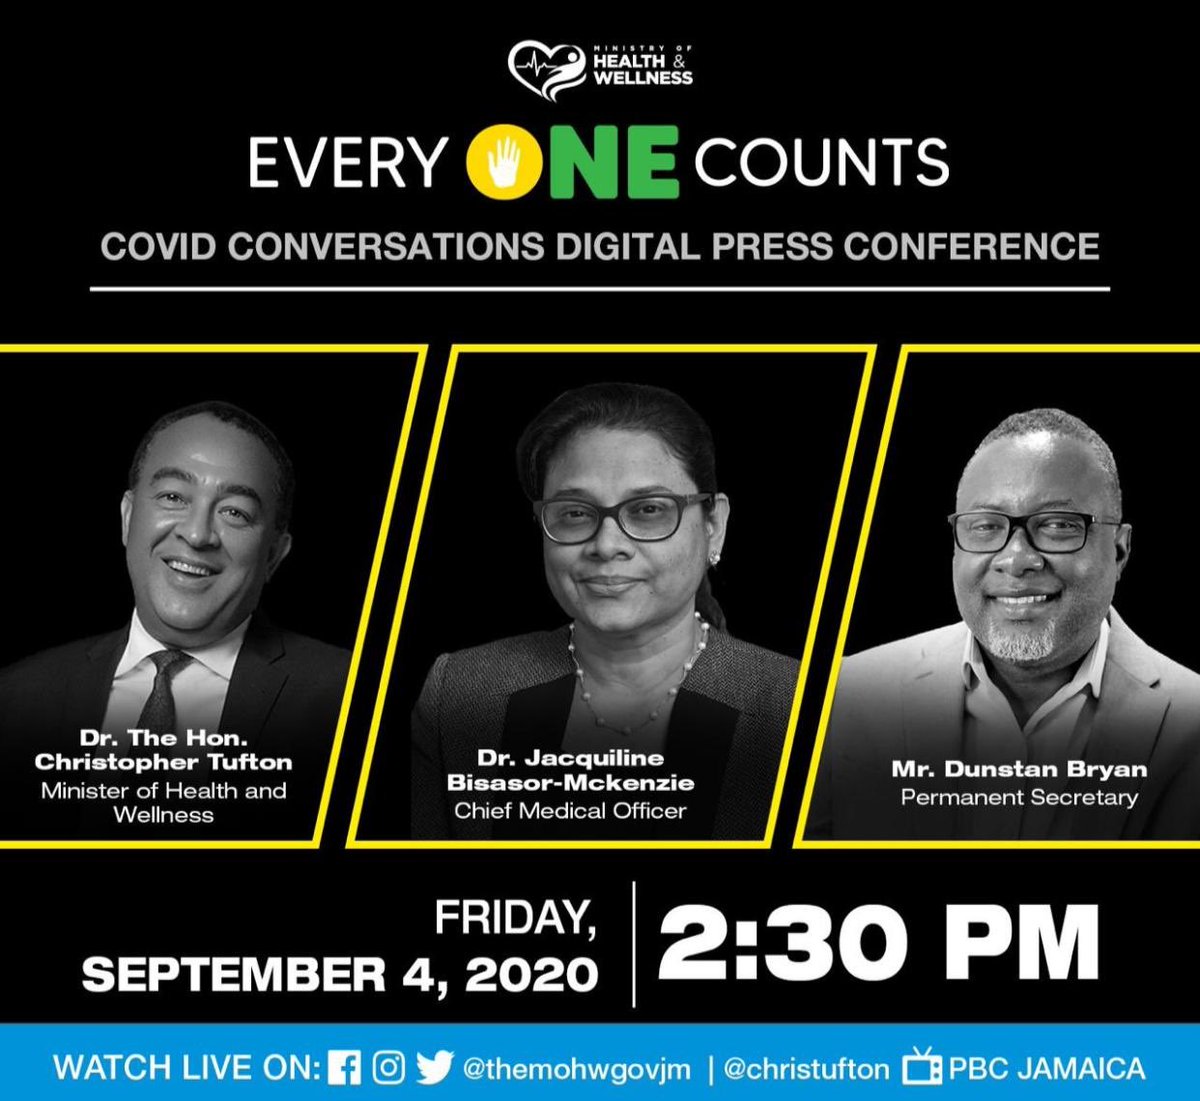 Join me and the @themohwgovjm for a Covid Conversations Press Briefing TODAY at 2:30pm where we will provide an update on COVID 19 in Jamaica.
#JaCovid19 #CovidConversations